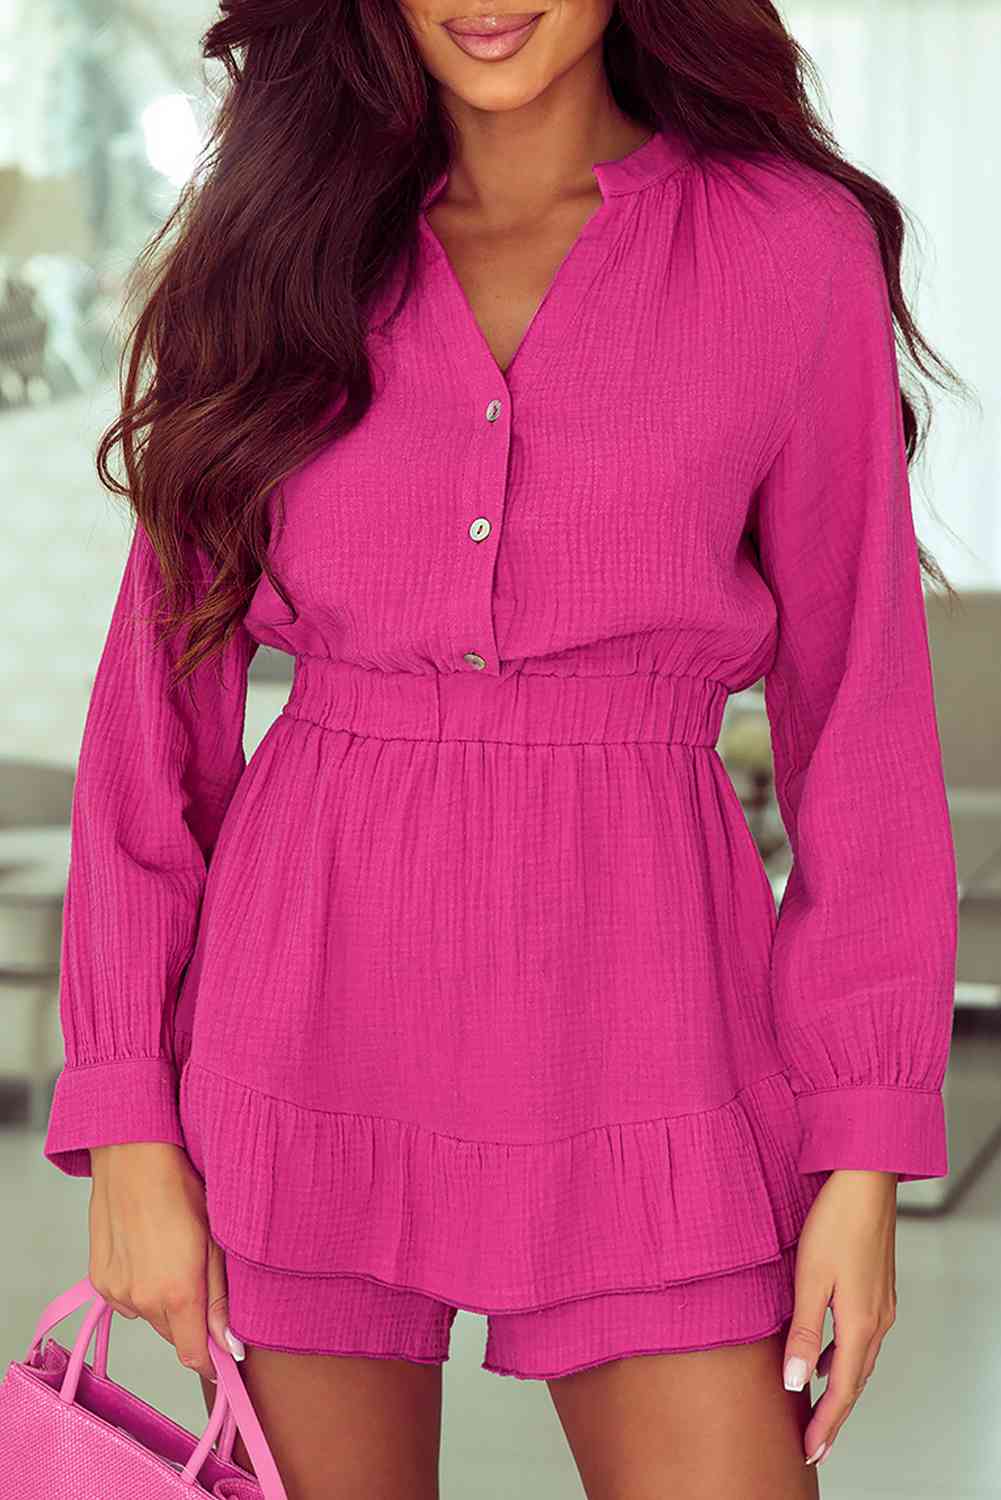 Buttoned Notched Neck Long Sleeve Romper - Pahabu